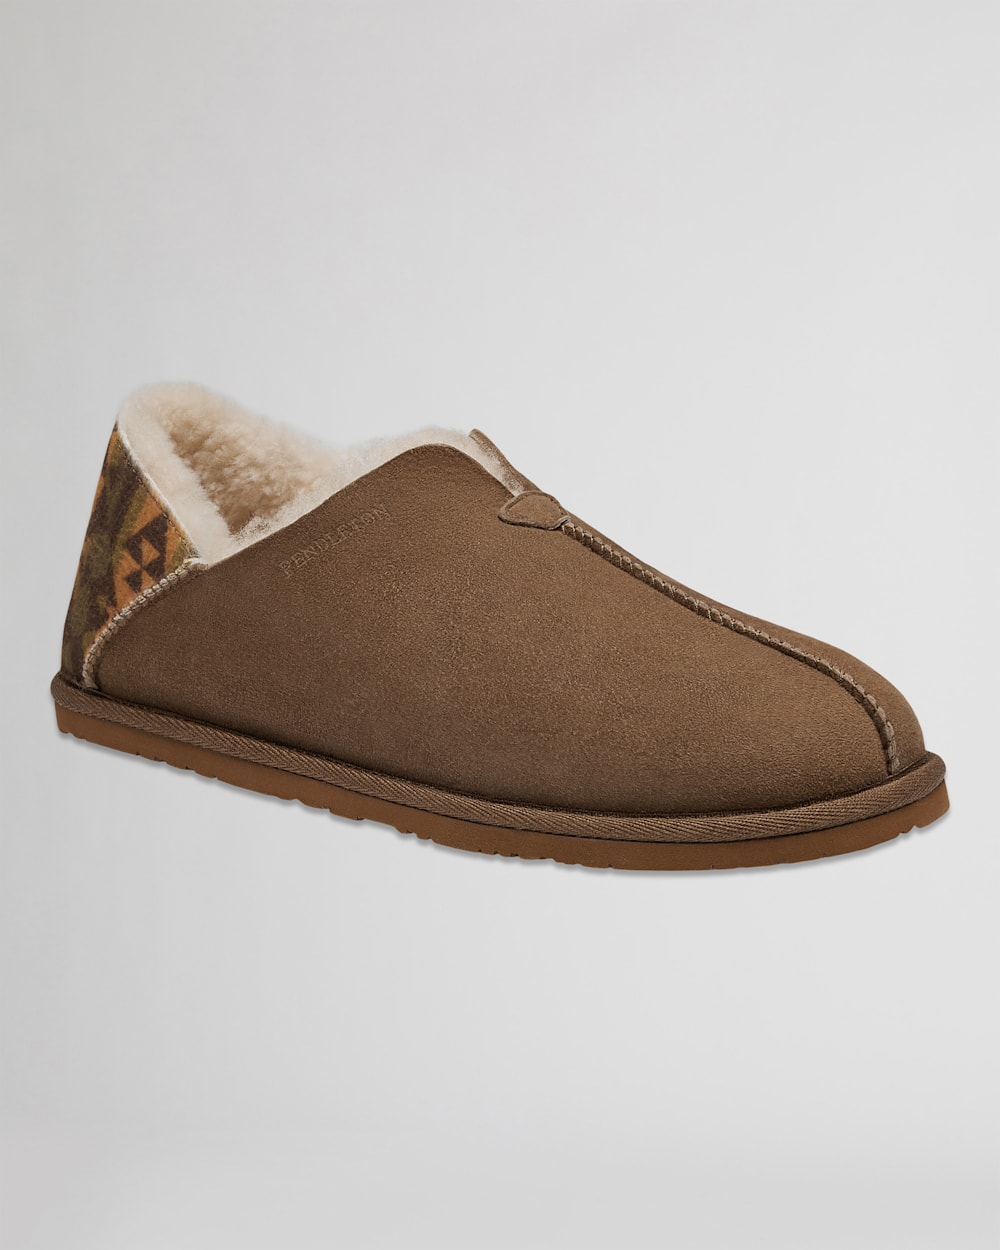 ALTERNATE VIEW OF MEN'S COUCH CRUISER SLIPPERS IN DESERT BROWN image number 2